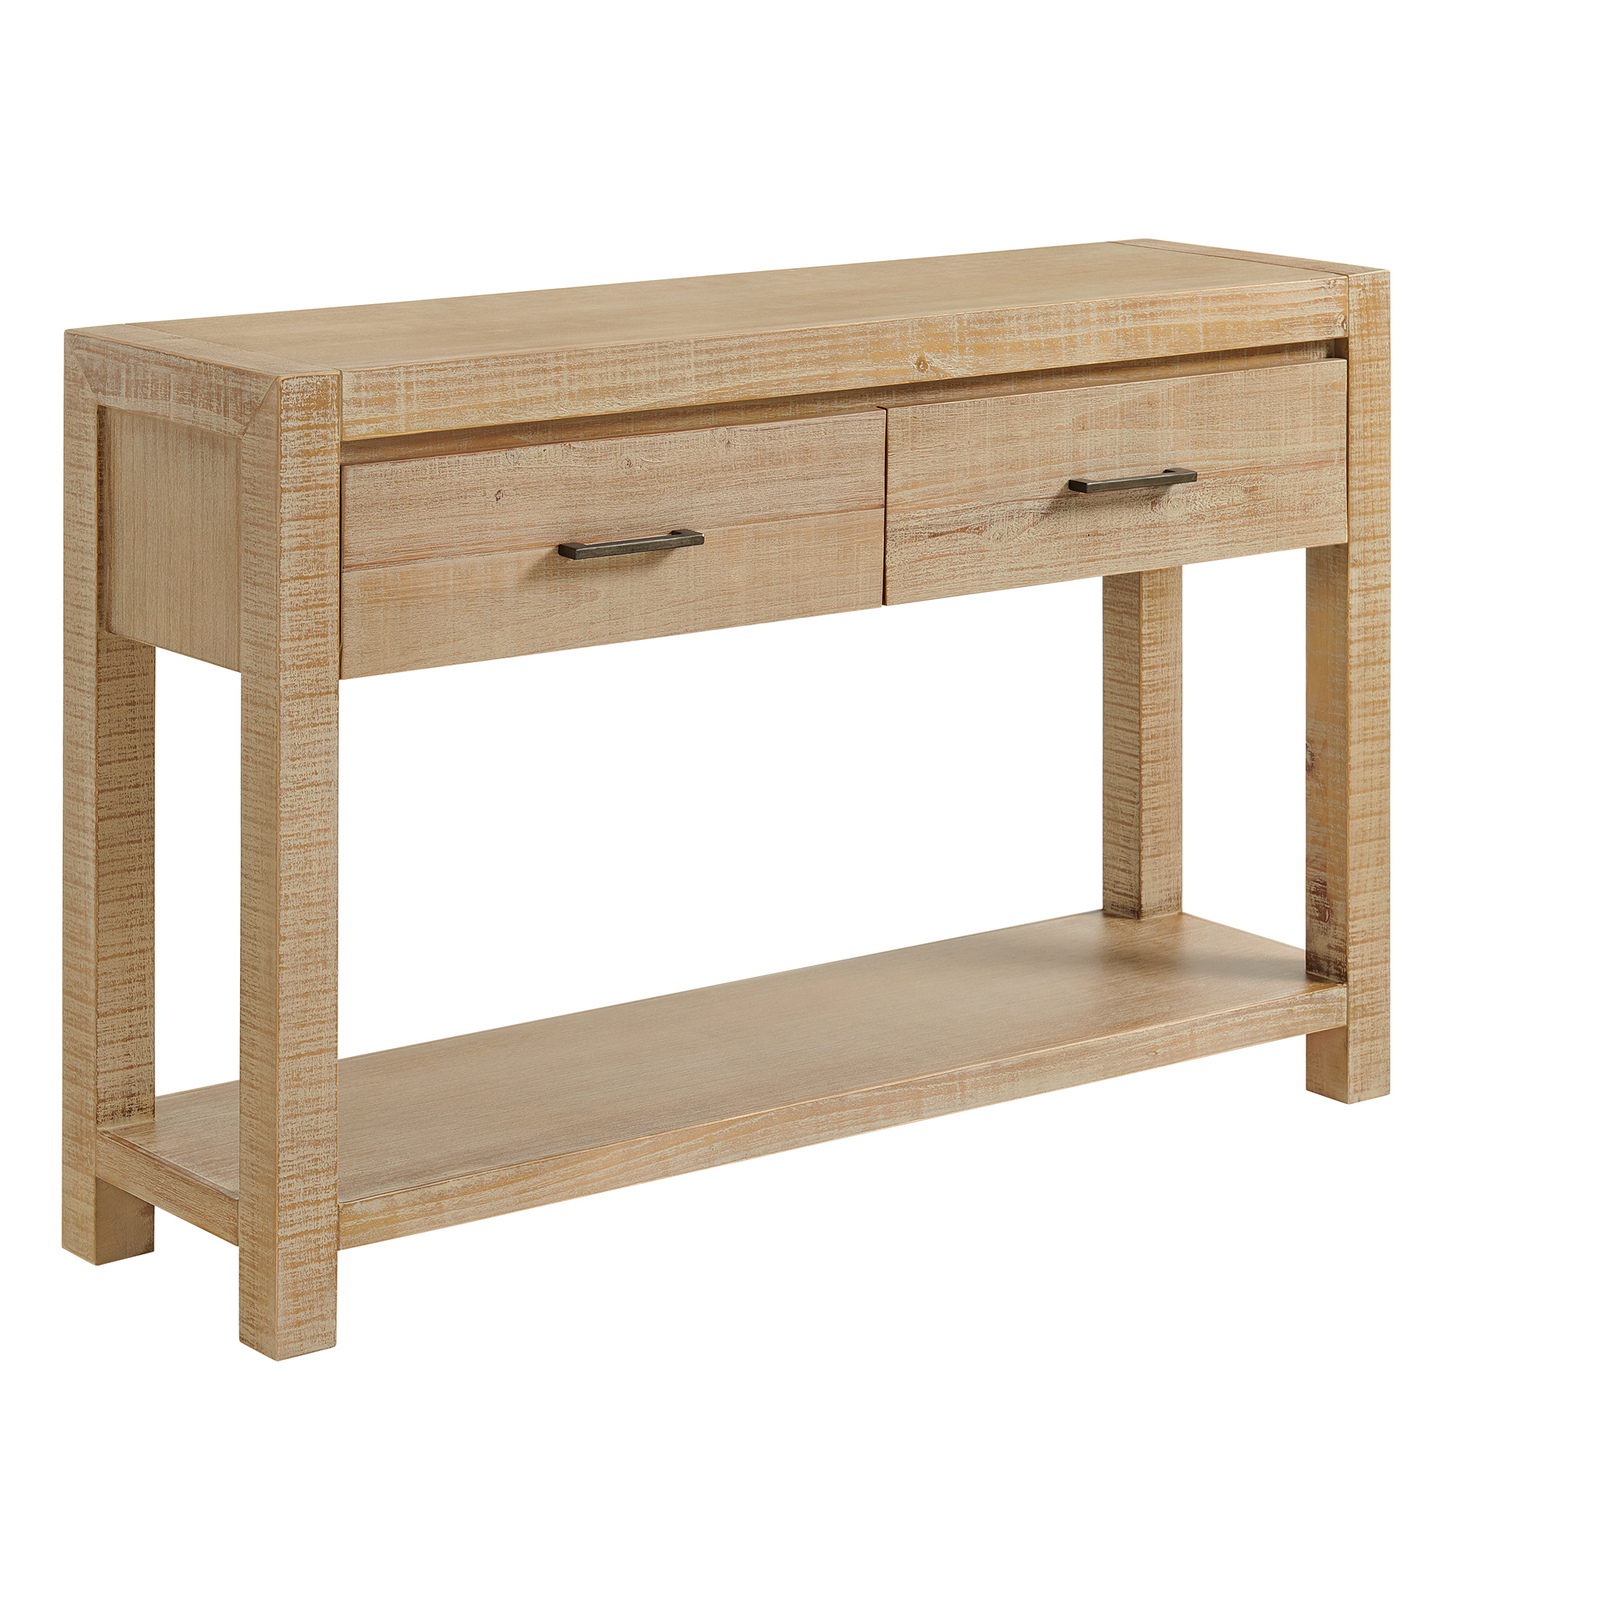 Homefurn Hall Sofa Table 2 Drawer Timber 1280mm Canton Breeze 6528 CHT 